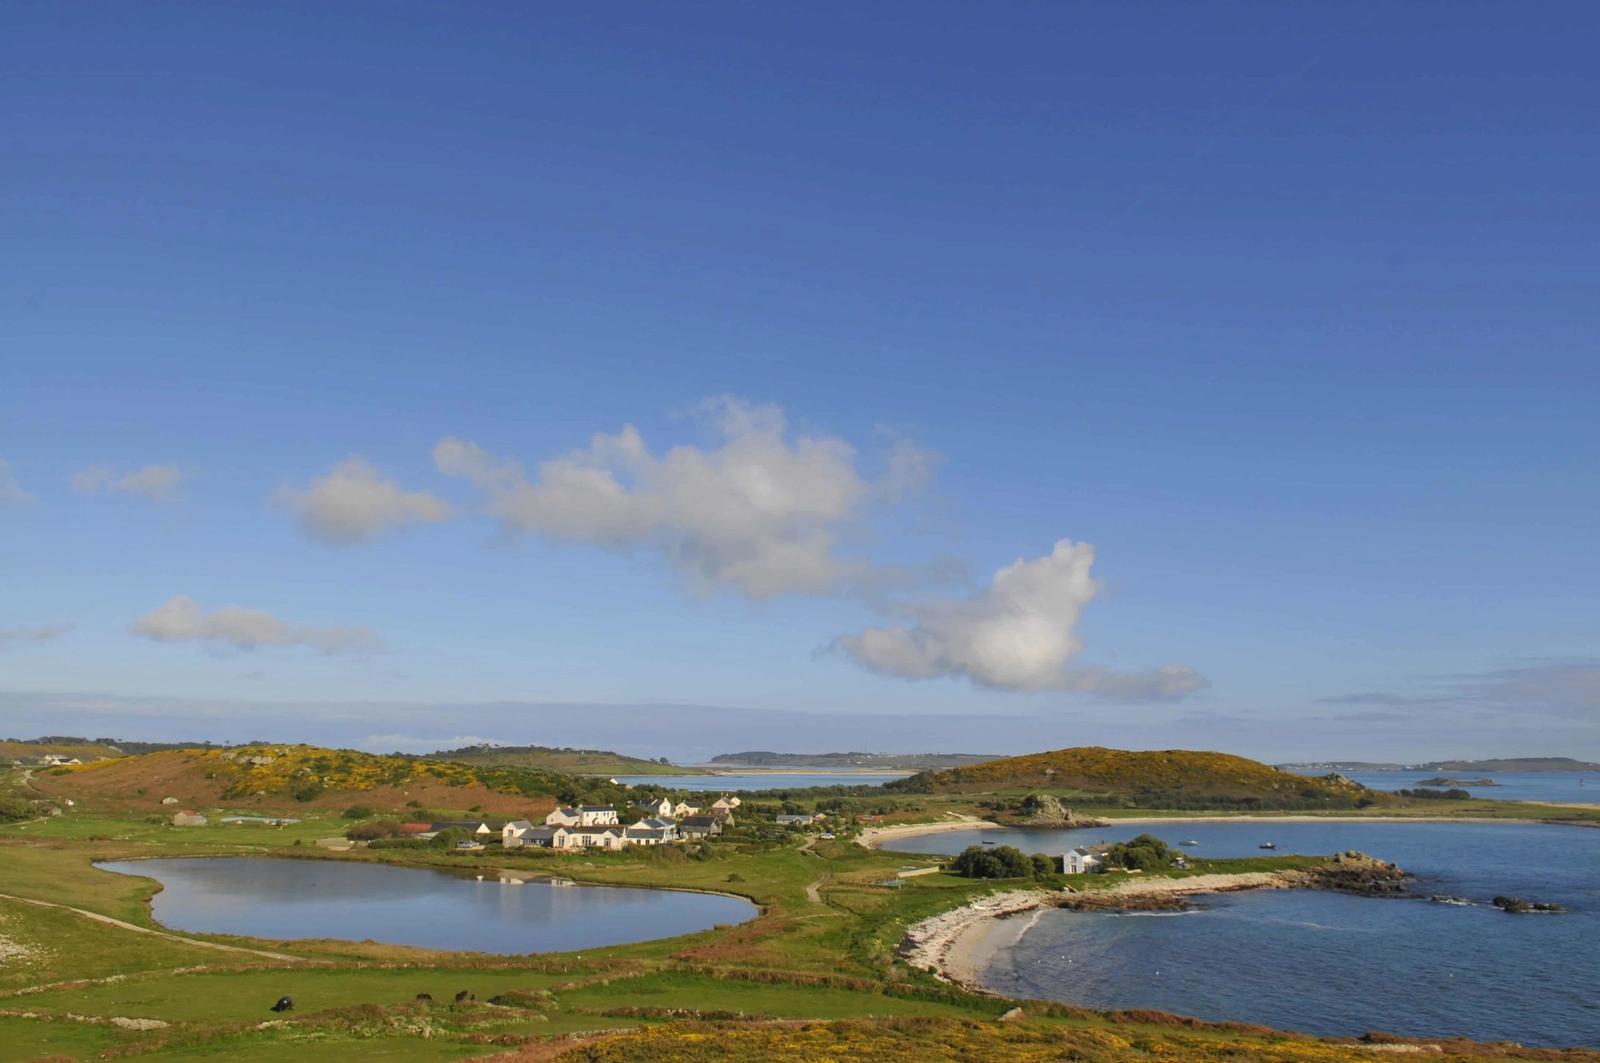 Hotels in Isles of Scilly